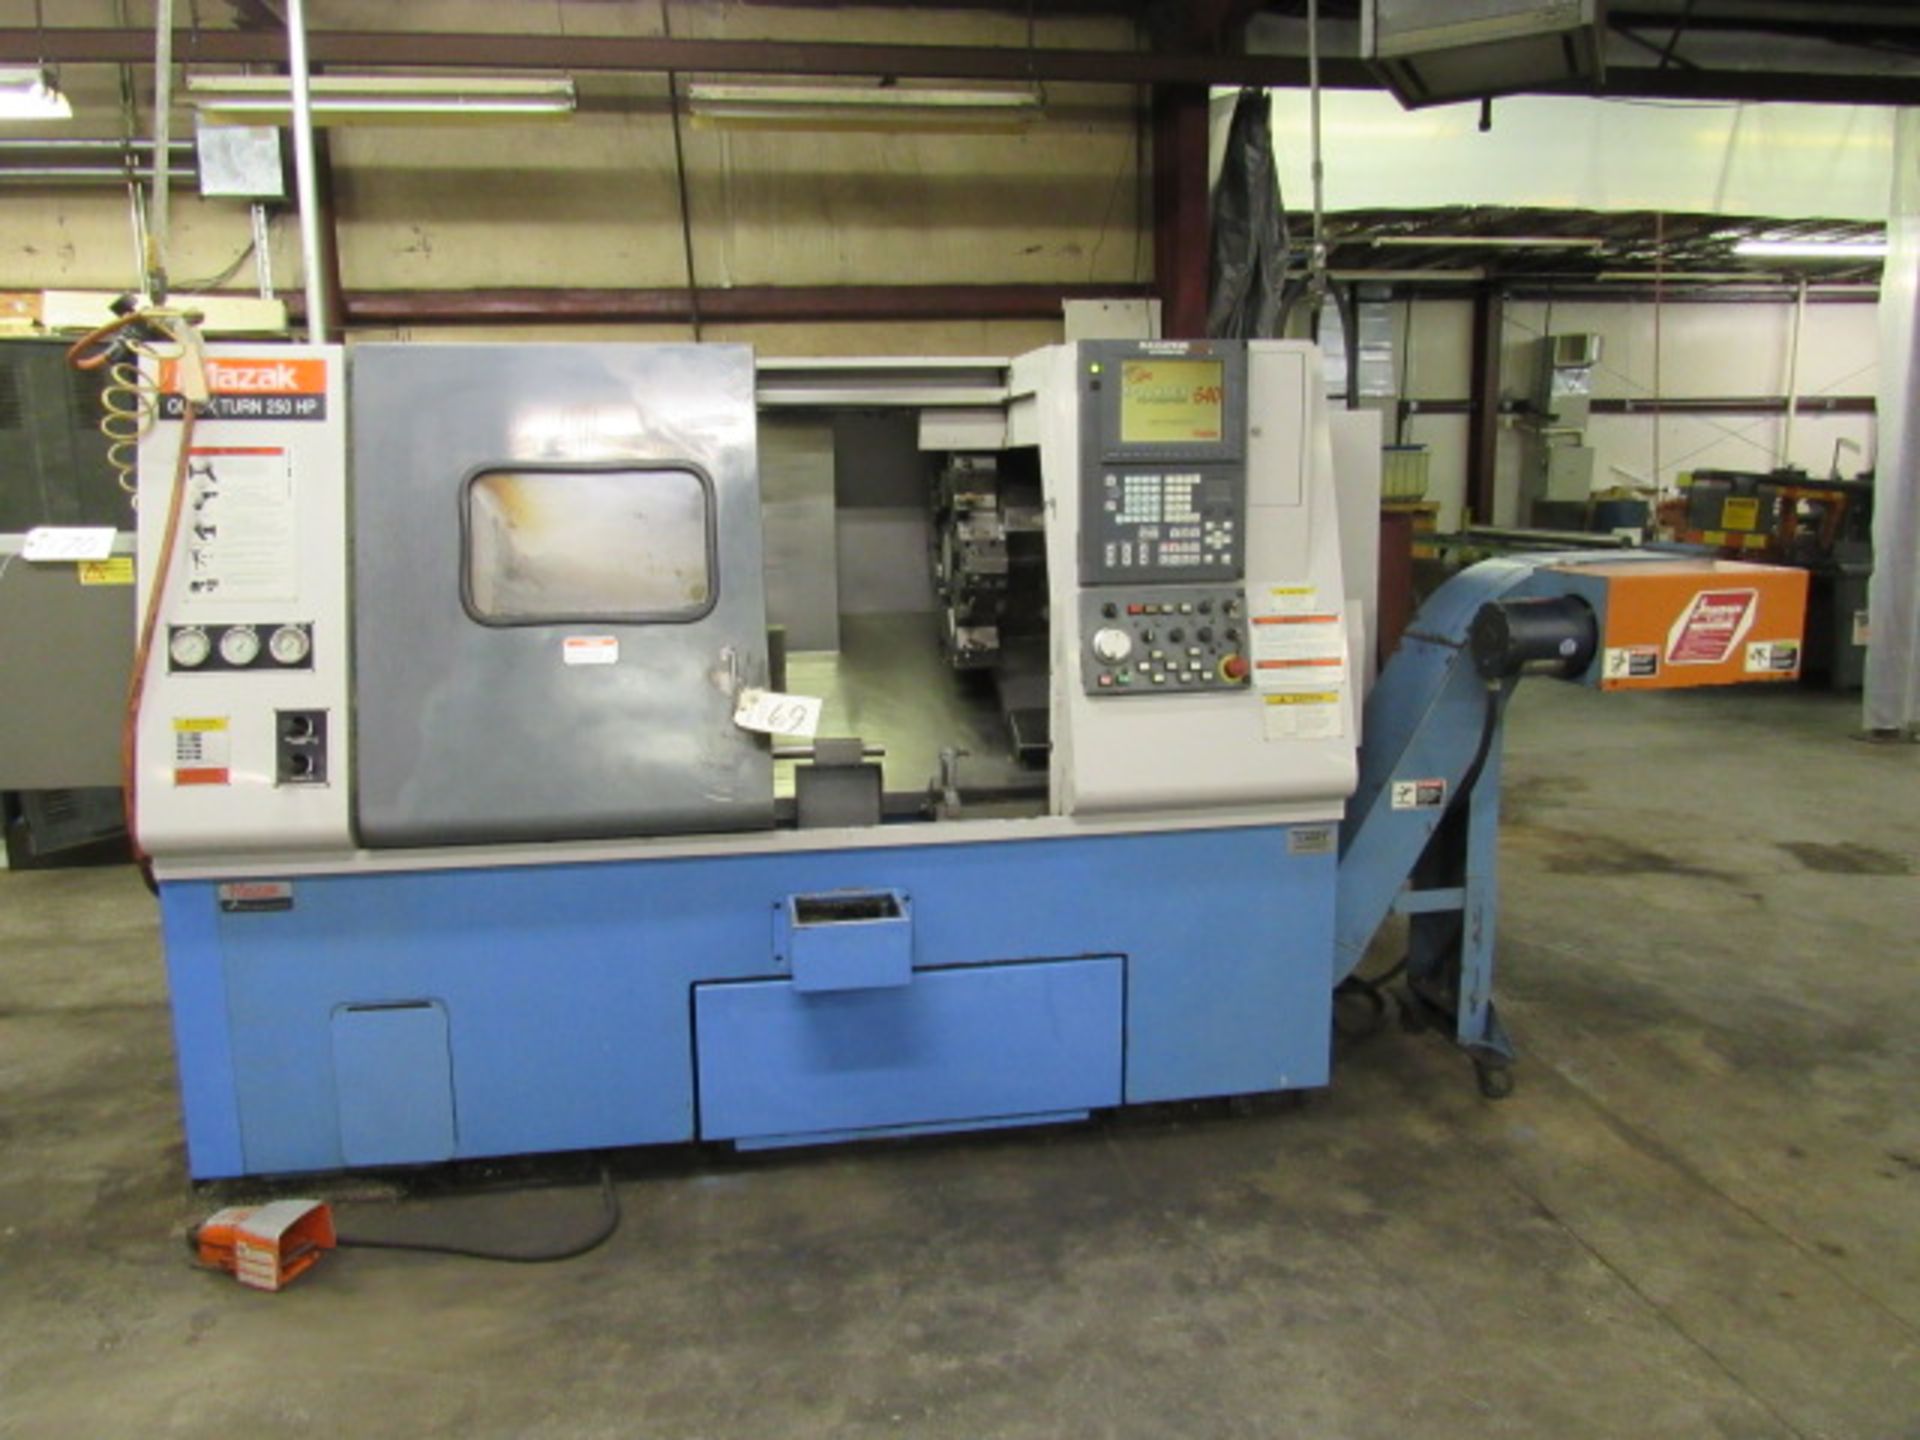 Mazak QT250 HP CNC Turning Center with 10'' 3-Jaw Power Chuck, Approx 30'' to Tailstock, 12 Position